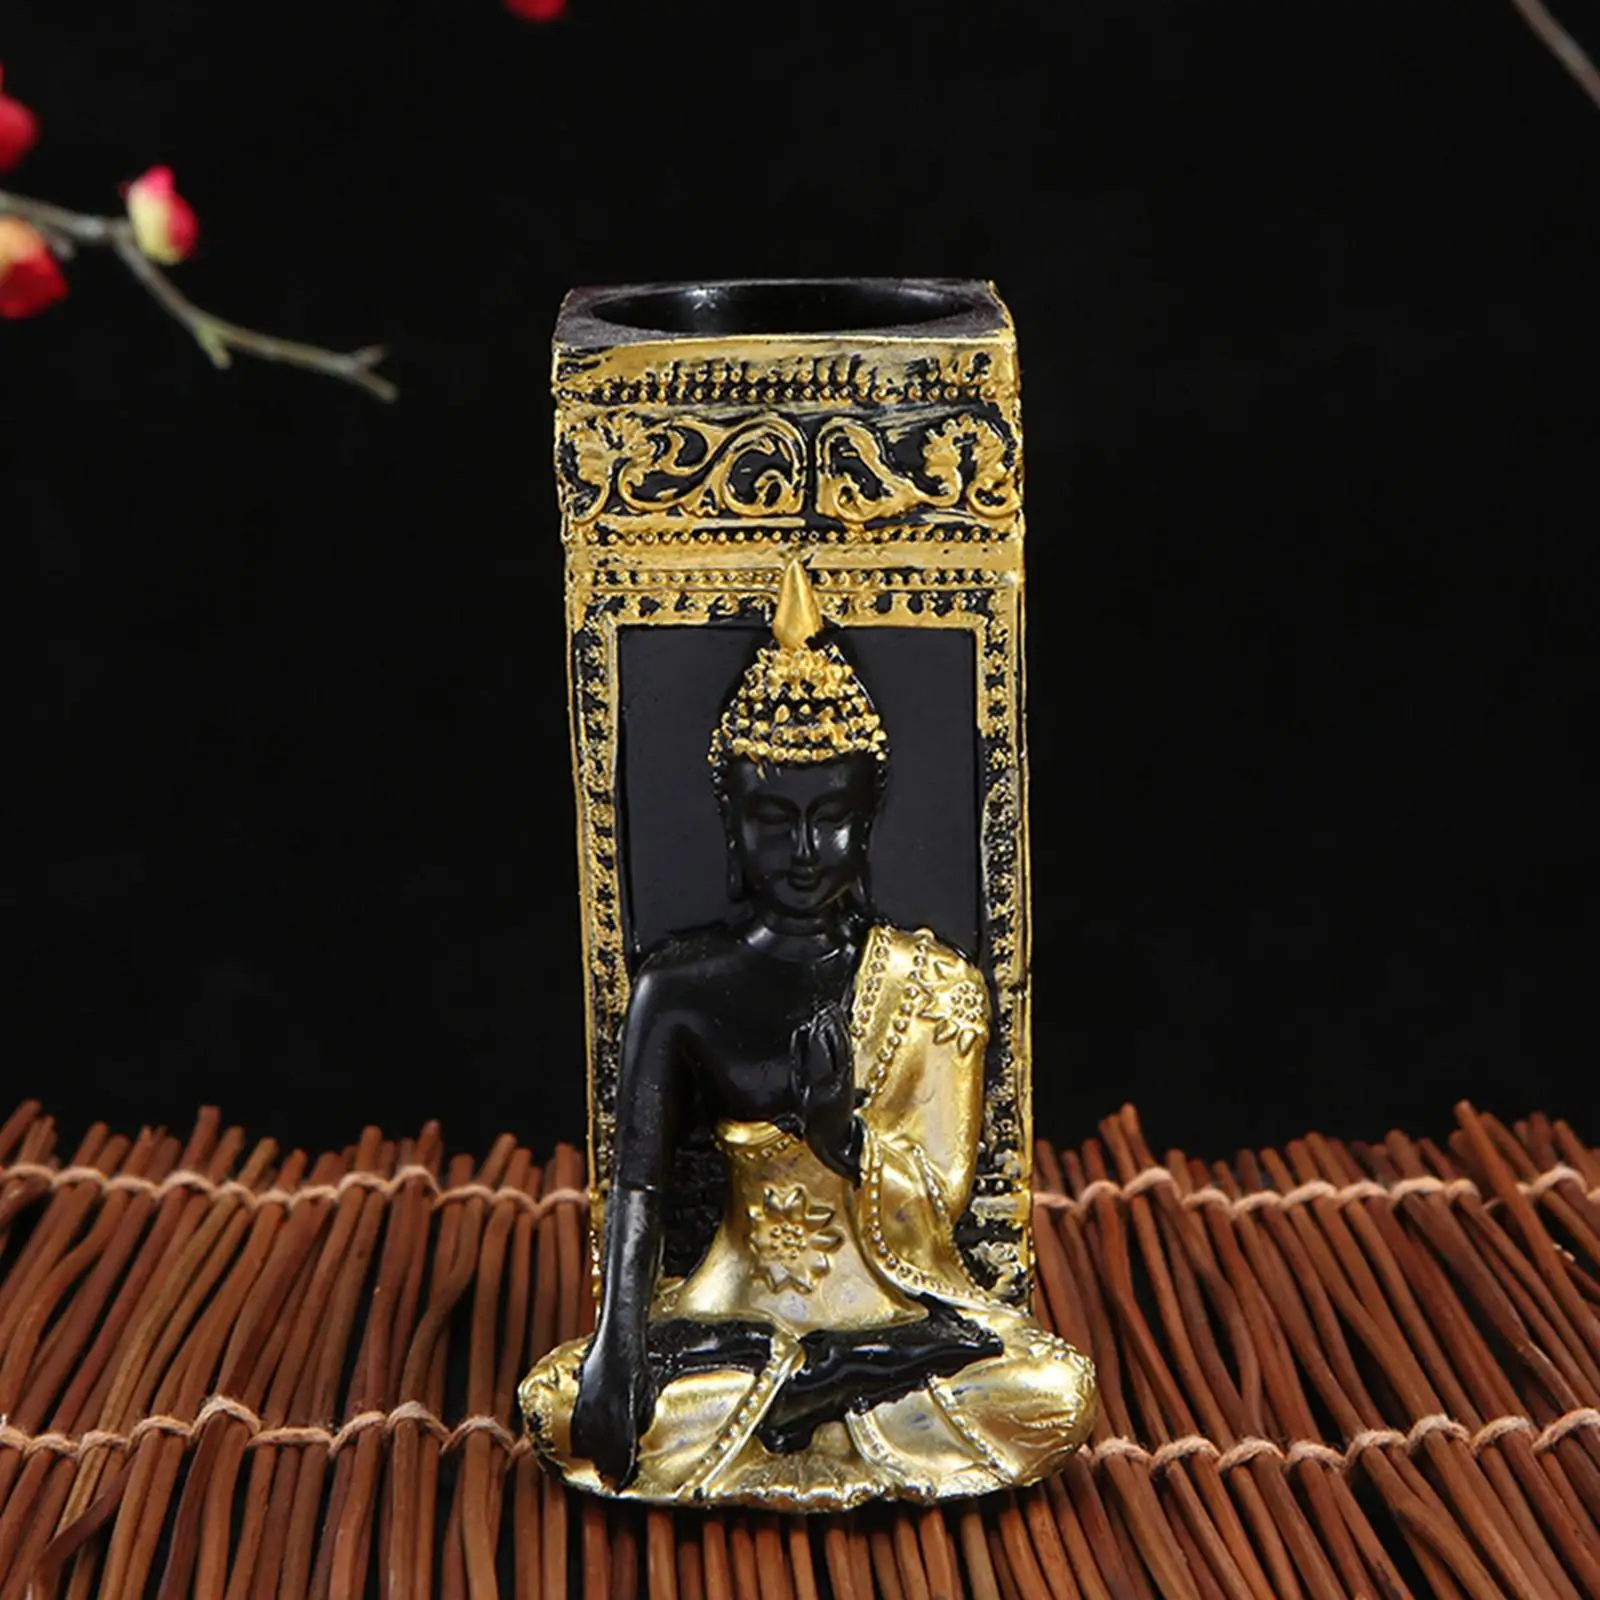 Buddha Sculpture Ornaments Crafts Miniature Gift Accessories Arts Missionary Fengshui Figurine Figurines for Home Decor Garden